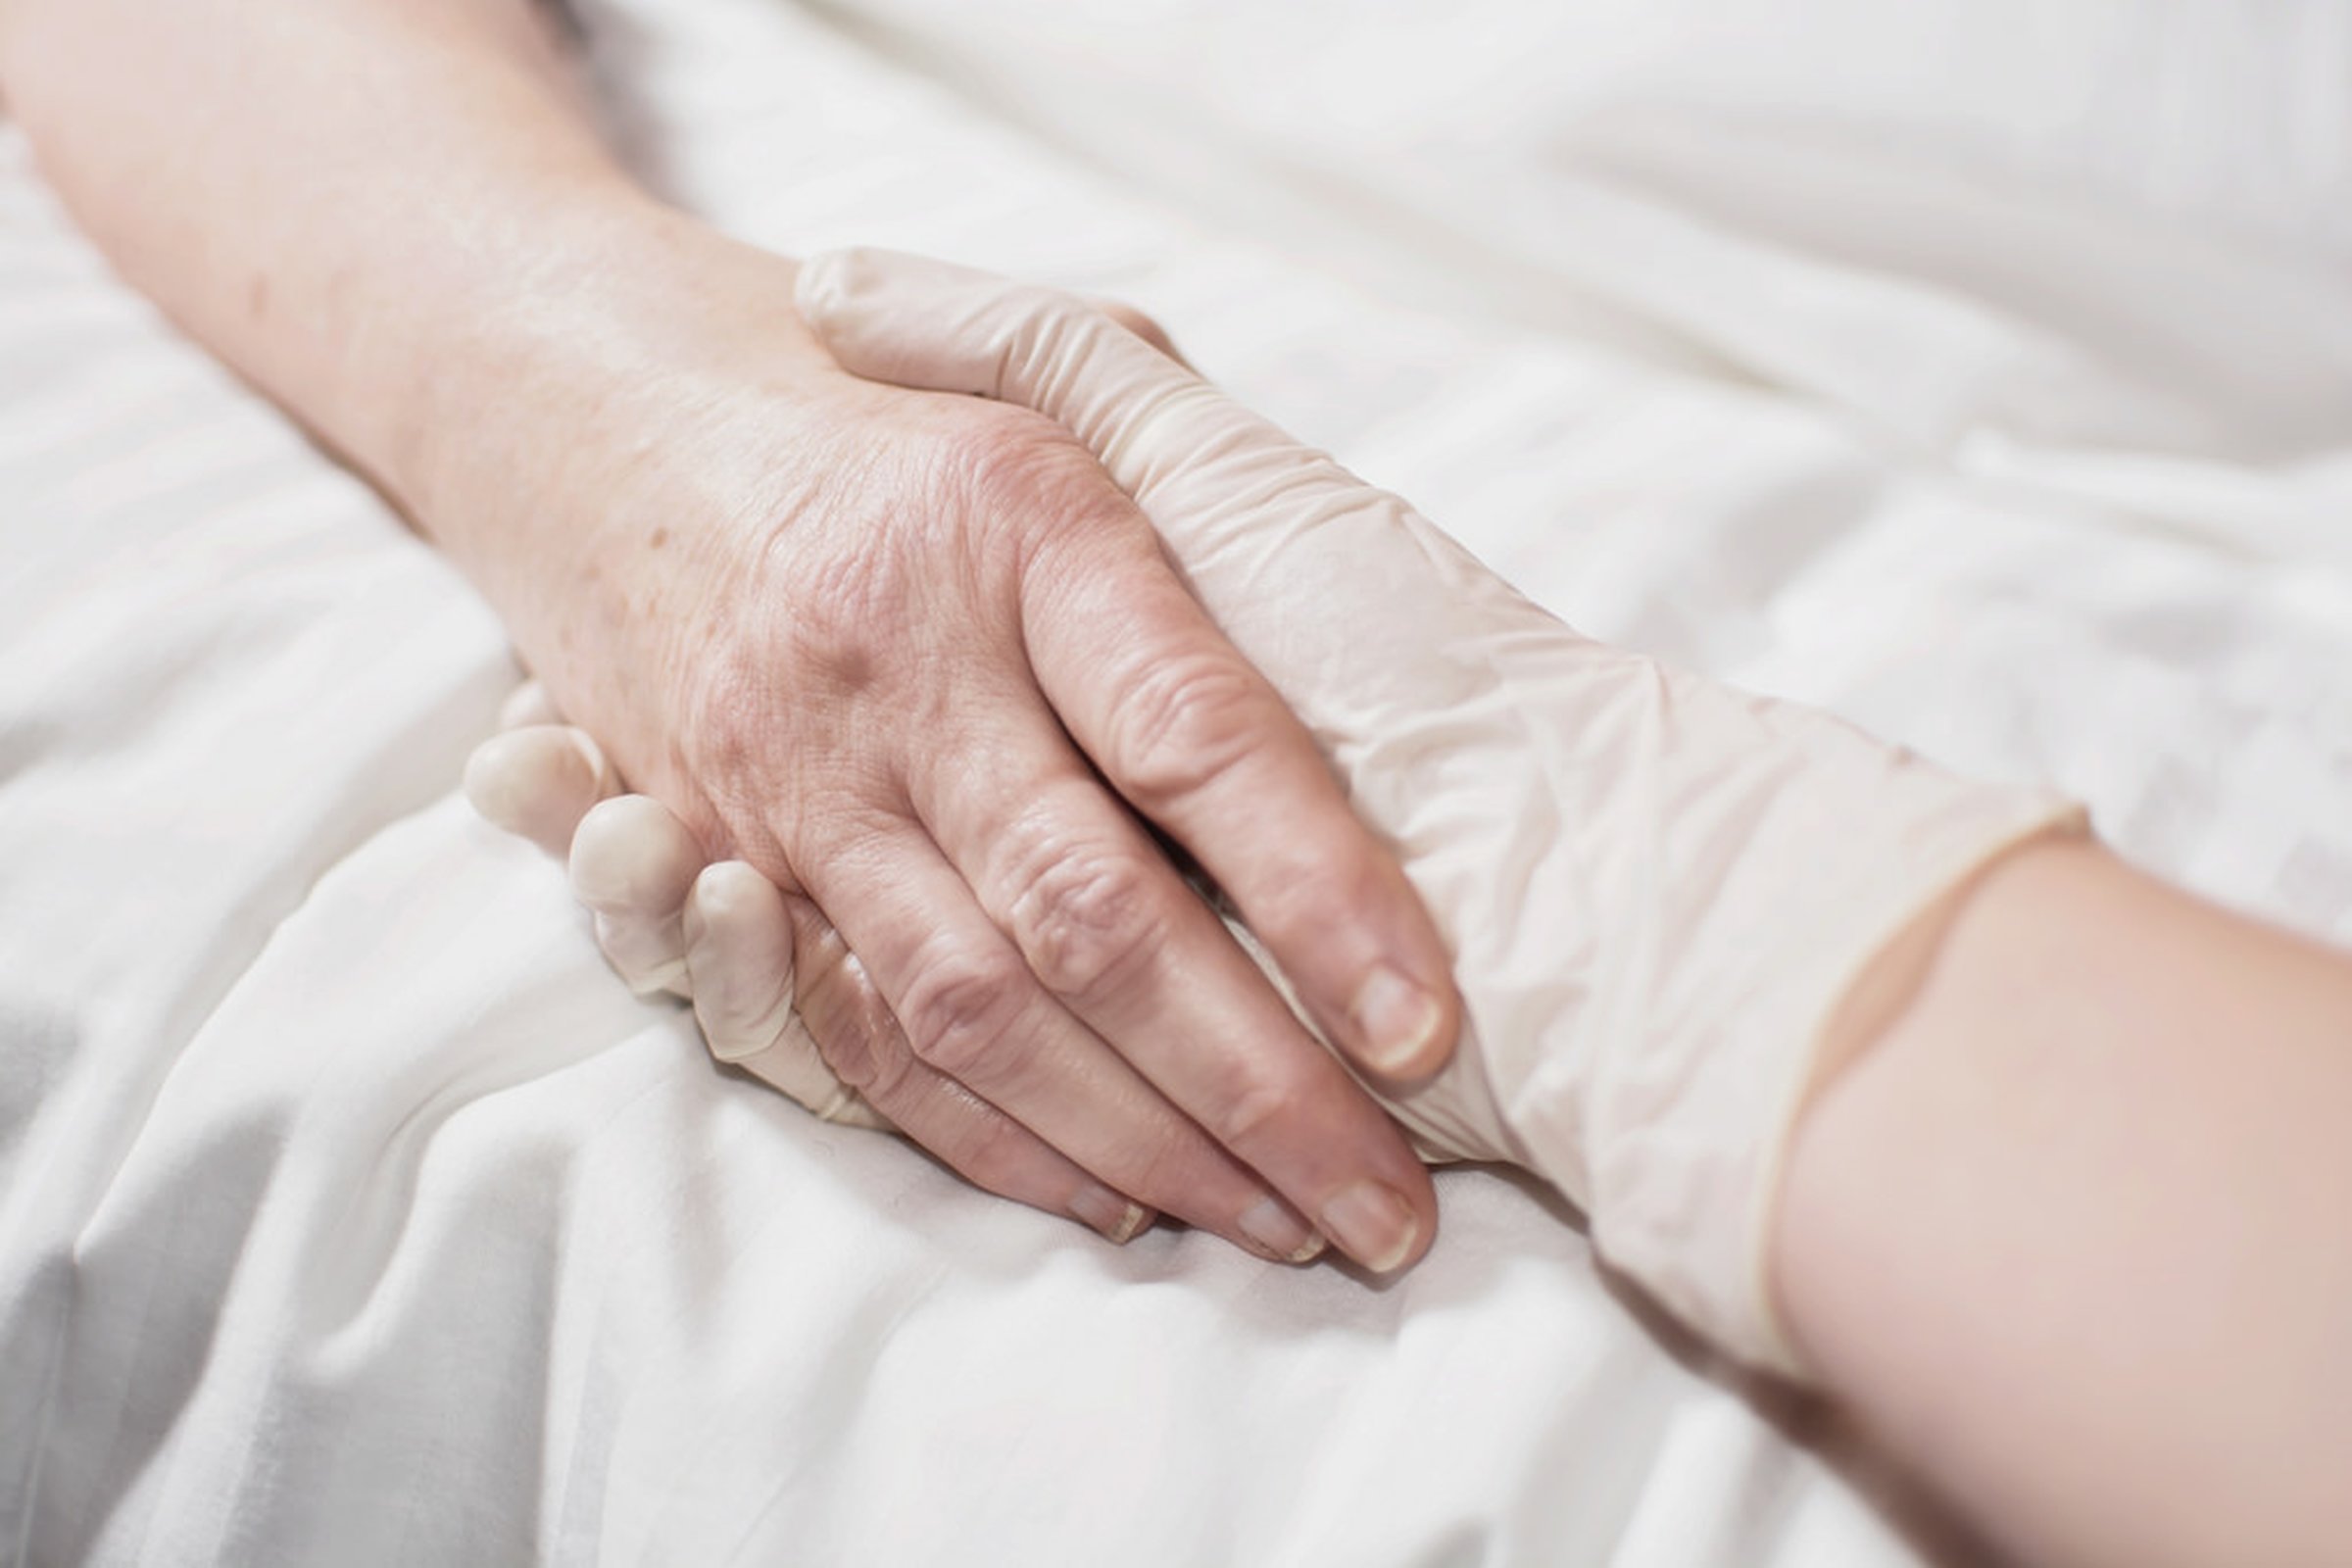 Dignity at the End of Life: What’s Beneath the Assisted Dying Debate?